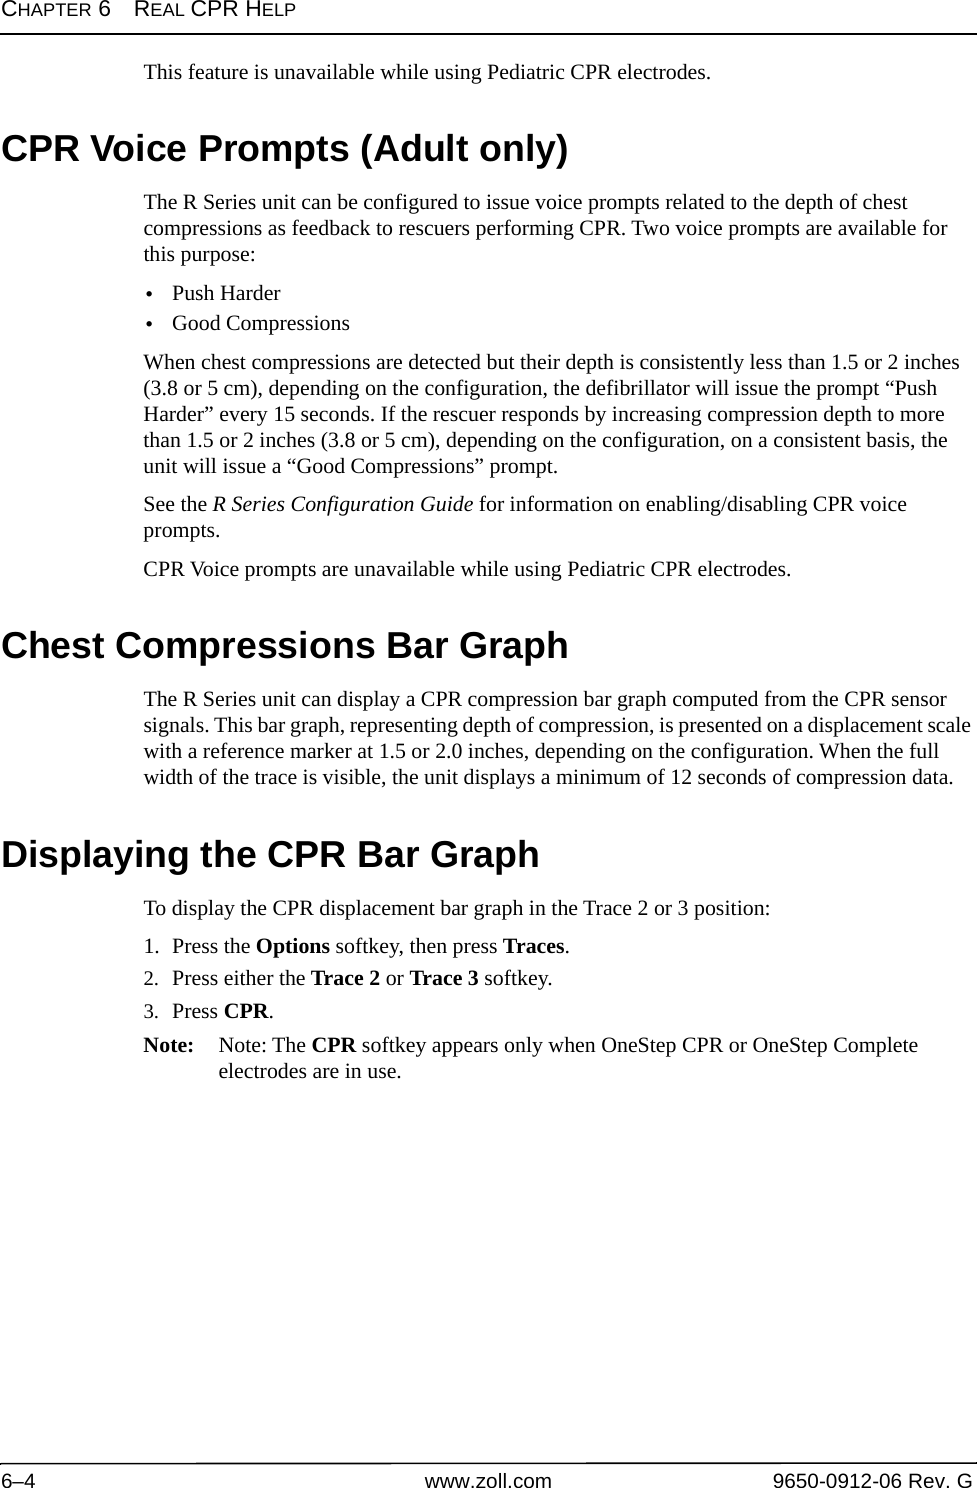 CHAPTER 6REAL CPR HELP6–4 www.zoll.com 9650-0912-06 Rev. GThis feature is unavailable while using Pediatric CPR electrodes.CPR Voice Prompts (Adult only)The R Series unit can be configured to issue voice prompts related to the depth of chest compressions as feedback to rescuers performing CPR. Two voice prompts are available for this purpose:•Push Harder•Good Compressions When chest compressions are detected but their depth is consistently less than 1.5 or 2 inches (3.8 or 5 cm), depending on the configuration, the defibrillator will issue the prompt “Push Harder” every 15 seconds. If the rescuer responds by increasing compression depth to more than 1.5 or 2 inches (3.8 or 5 cm), depending on the configuration, on a consistent basis, the unit will issue a “Good Compressions” prompt. See the R Series Configuration Guide for information on enabling/disabling CPR voice prompts.CPR Voice prompts are unavailable while using Pediatric CPR electrodes.Chest Compressions Bar GraphThe R Series unit can display a CPR compression bar graph computed from the CPR sensor signals. This bar graph, representing depth of compression, is presented on a displacement scale with a reference marker at 1.5 or 2.0 inches, depending on the configuration. When the full width of the trace is visible, the unit displays a minimum of 12 seconds of compression data.Displaying the CPR Bar GraphTo display the CPR displacement bar graph in the Trace 2 or 3 position:1. Press the Options softkey, then press Traces.2. Press either the Trace 2 or Trace 3 softkey.3. Press CPR.Note: Note: The CPR softkey appears only when OneStep CPR or OneStep Complete electrodes are in use.